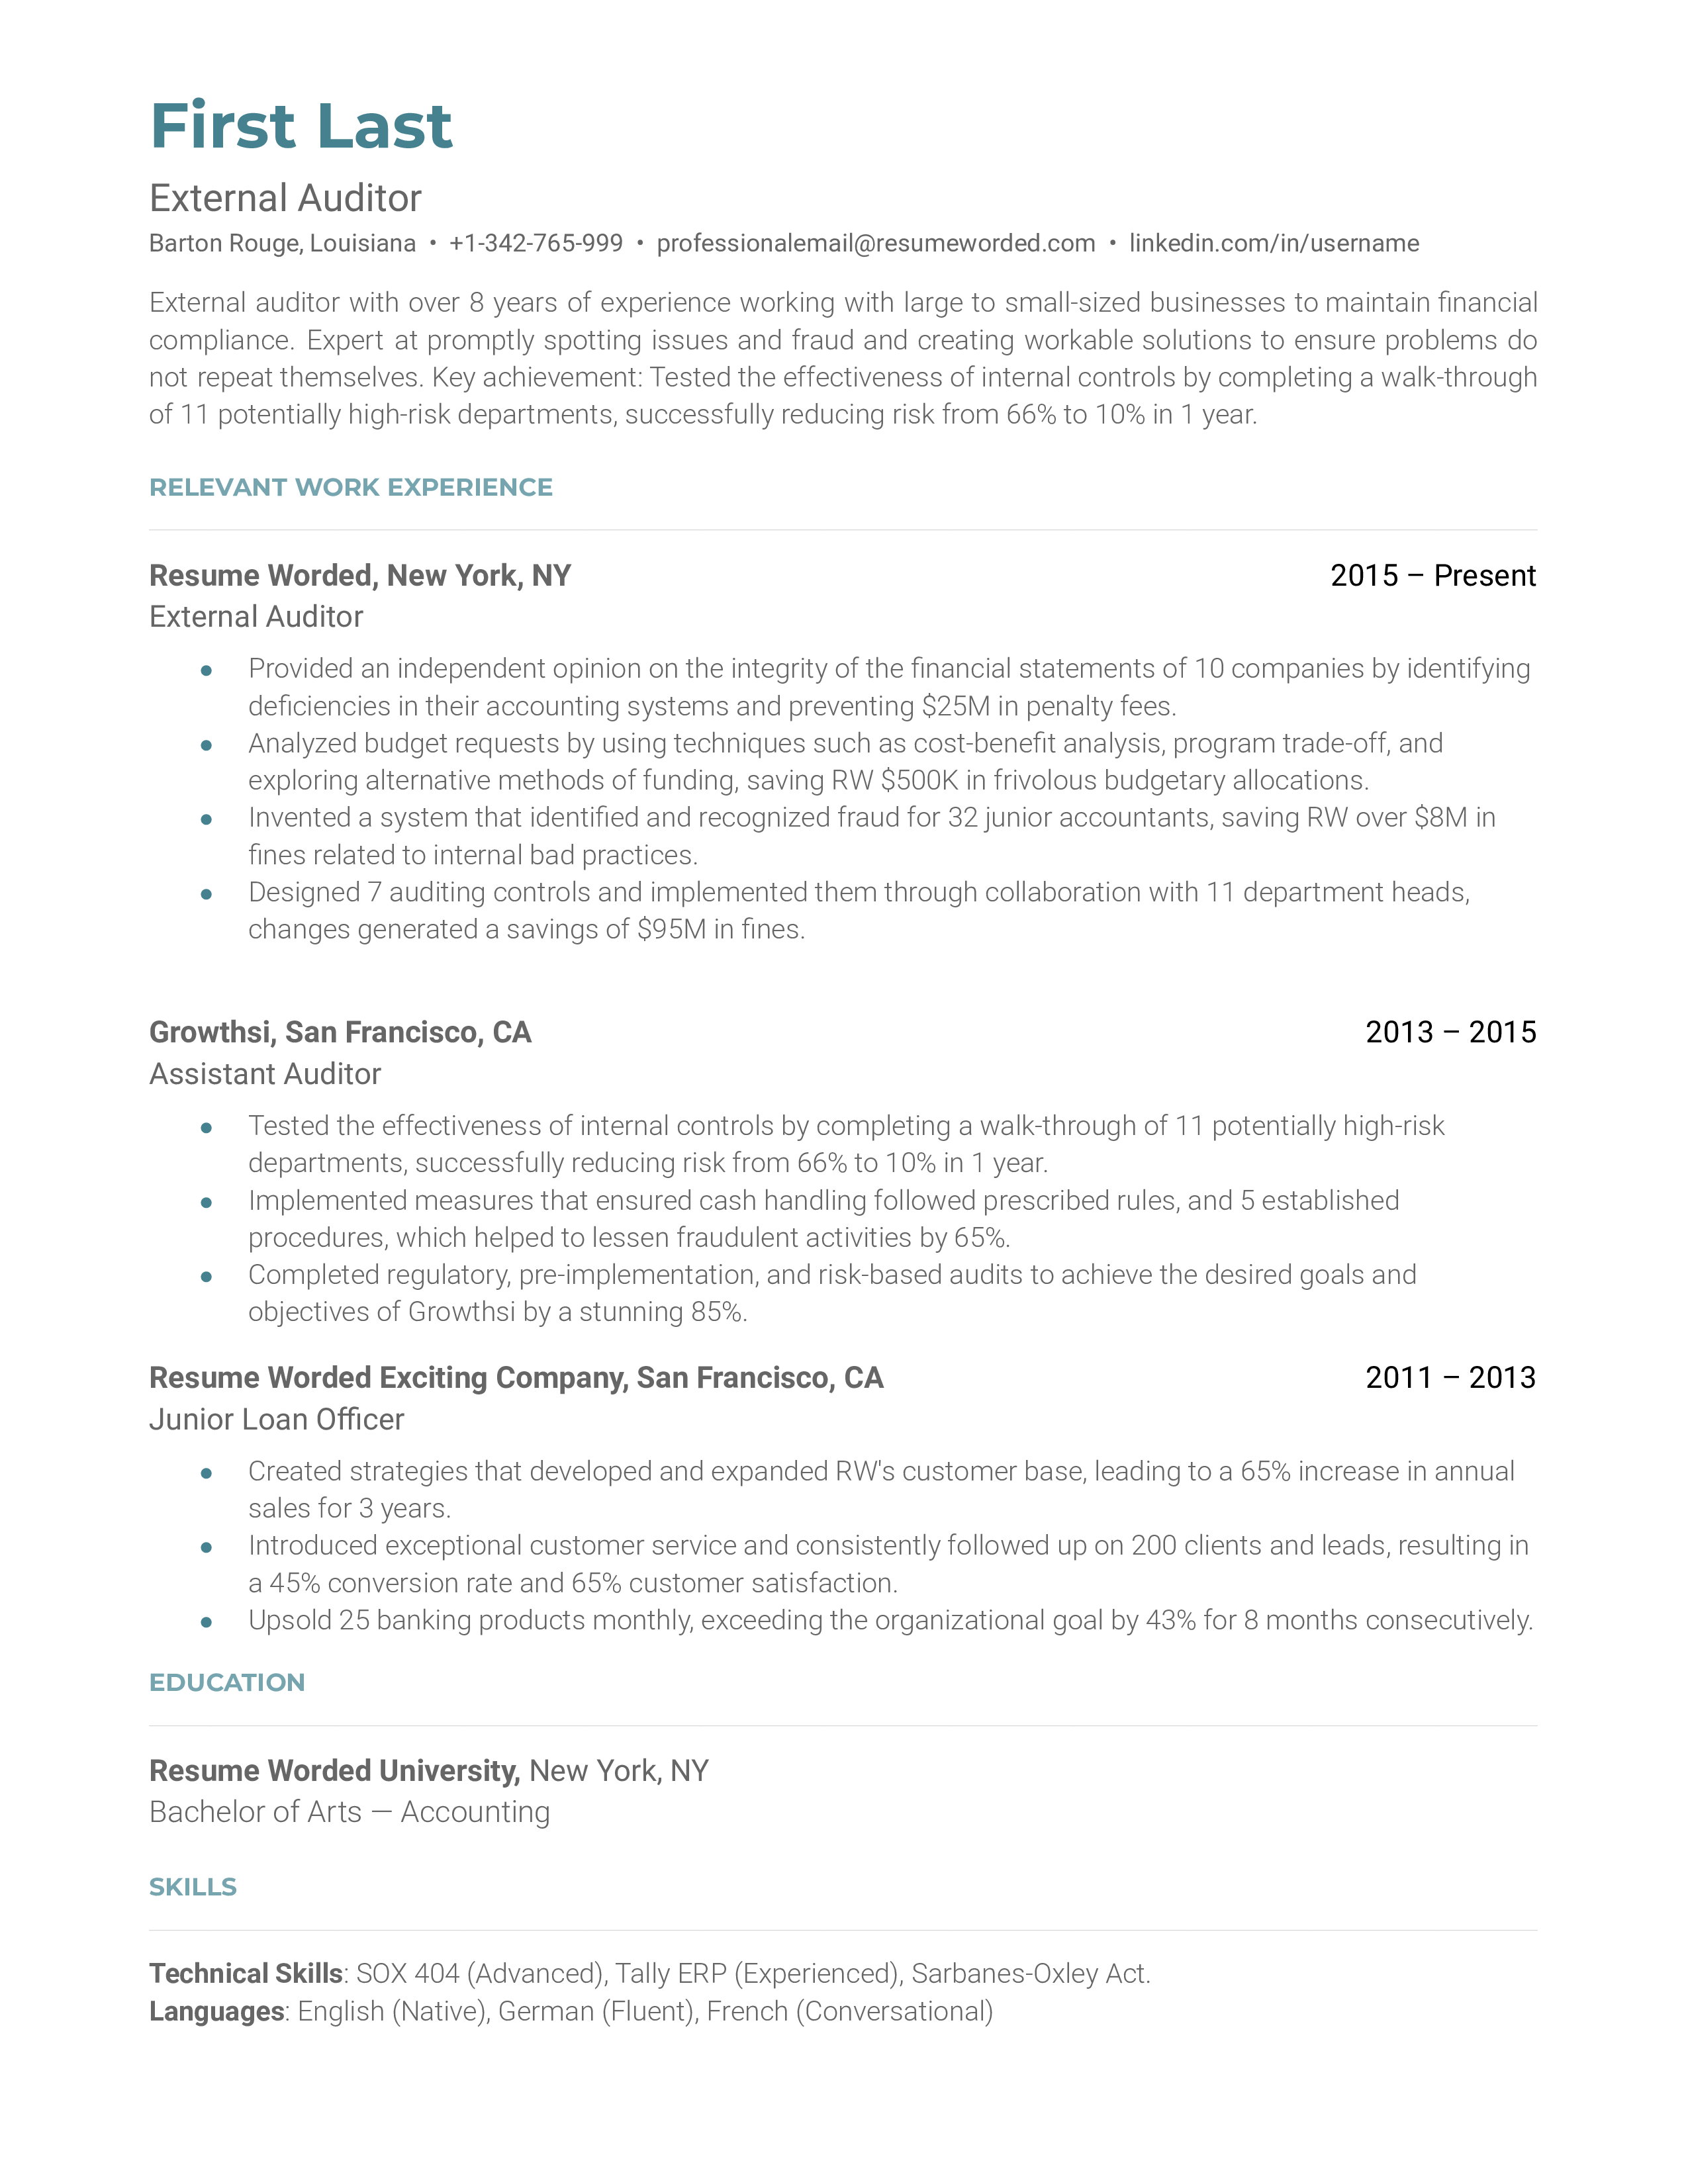 External Auditor Resume Template + Example